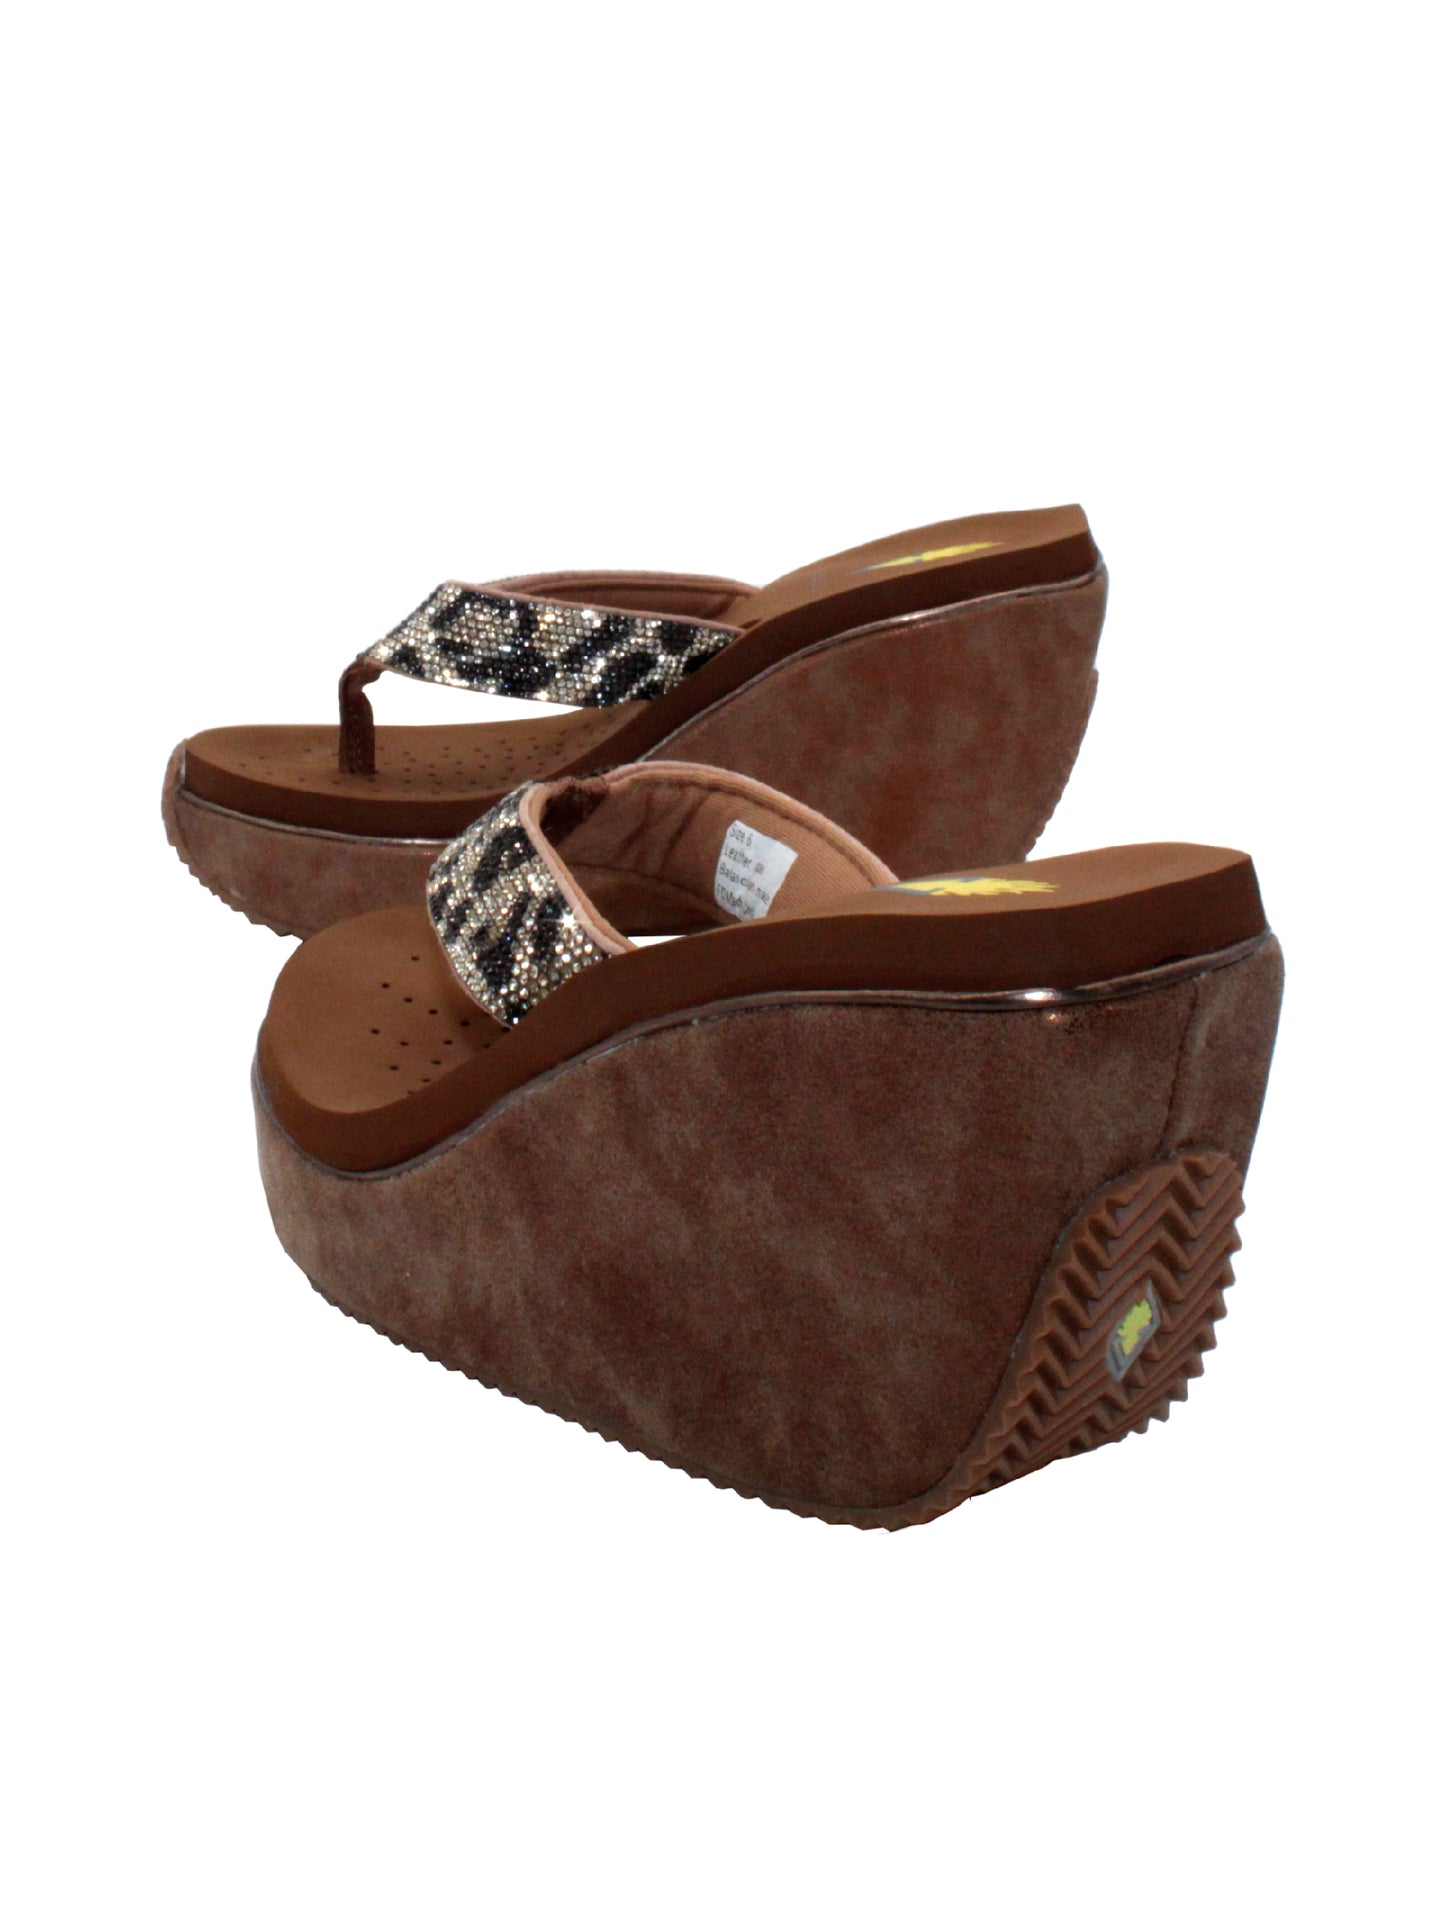 Volatile’s Glimpse platform wedge sandal’s leather upper straps are embellished with sparkling rhinestones. The classic thong style has a soft fabric post that rests gently between your toes, and the signature ultra-comfort EVA insole provides all day comfort. Perfect for special occasions, they’ll complement everything from dresses to jeans. tan multi 4